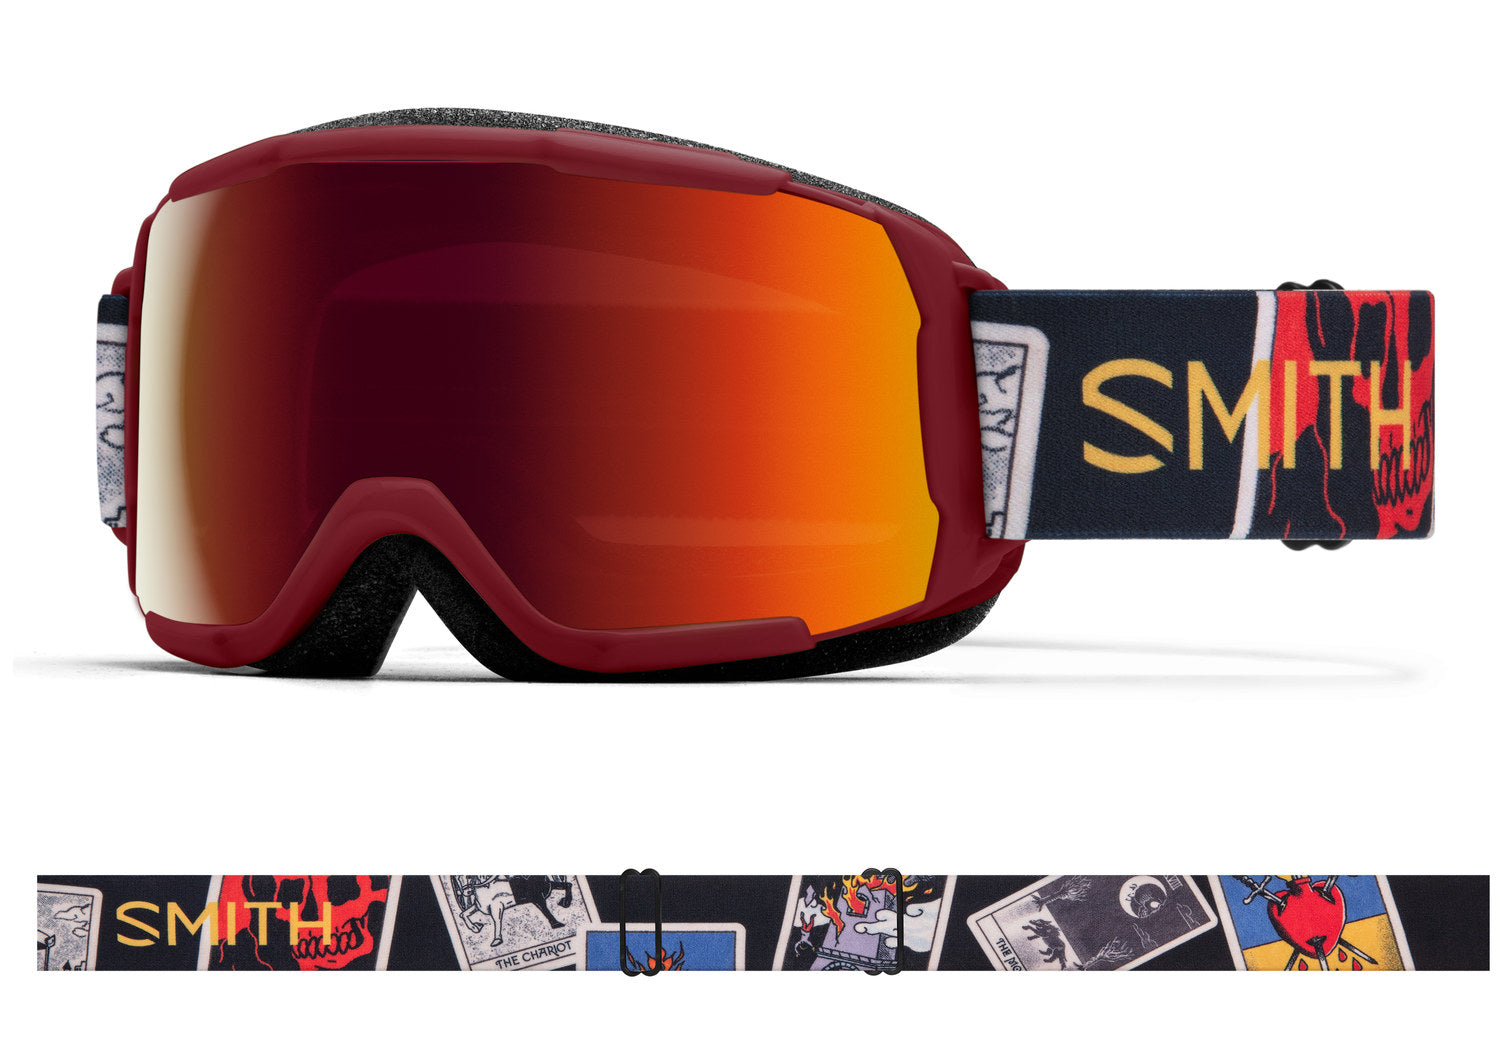 Smith Kids' Grom Snow Goggle Sangria Fortune Teller Red Sol-X Mirror Snow Goggles